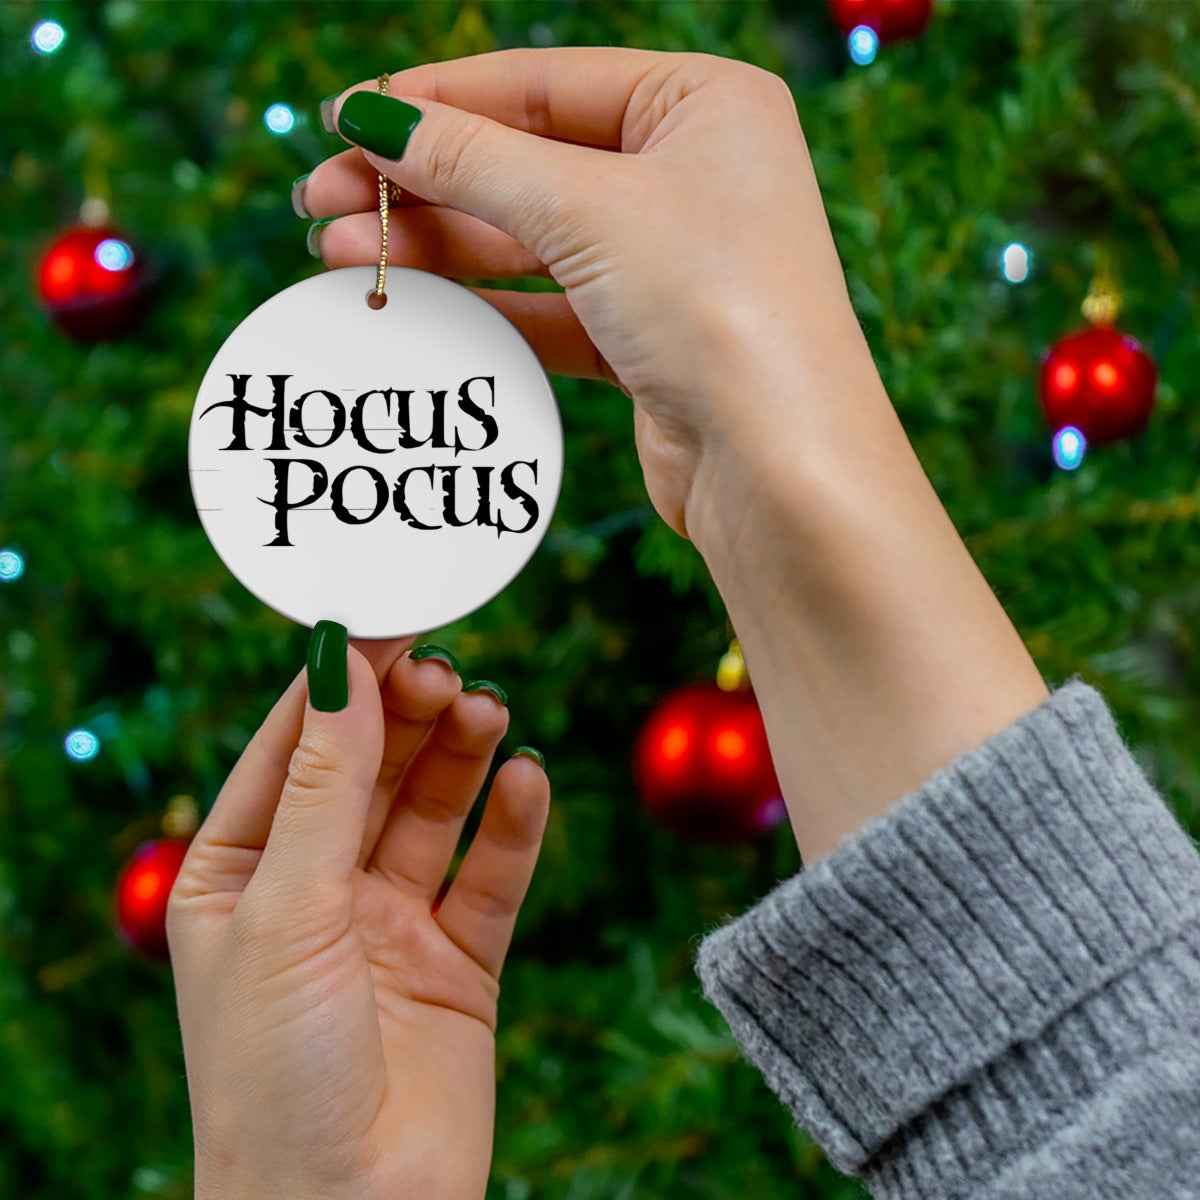 Hocus Pocus- Round Christmas Ceramic Decoration Ornaments - Creations by Chris and Carlos